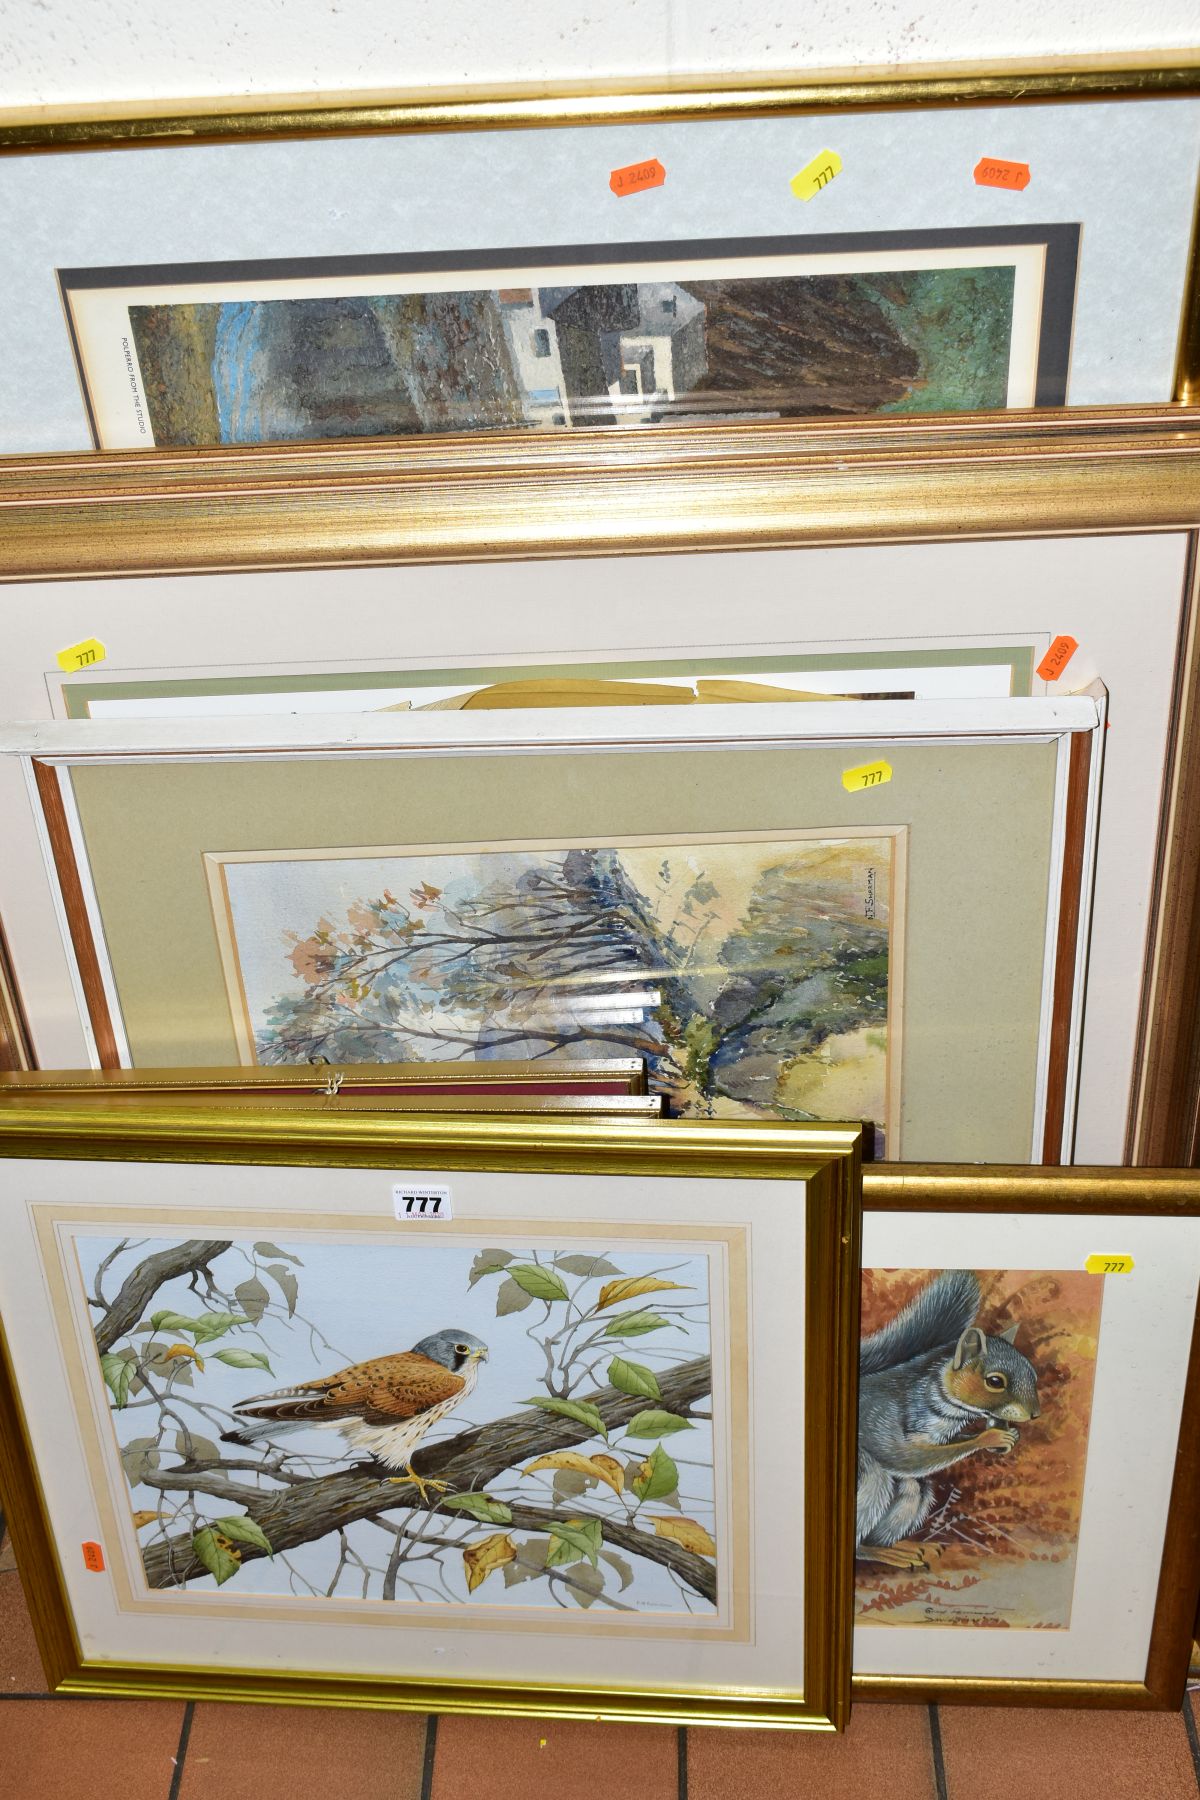 PAINTINGS AND PRINTS ETC, to include a watercolour of a kestrel by Derek Rowson, framed, gray